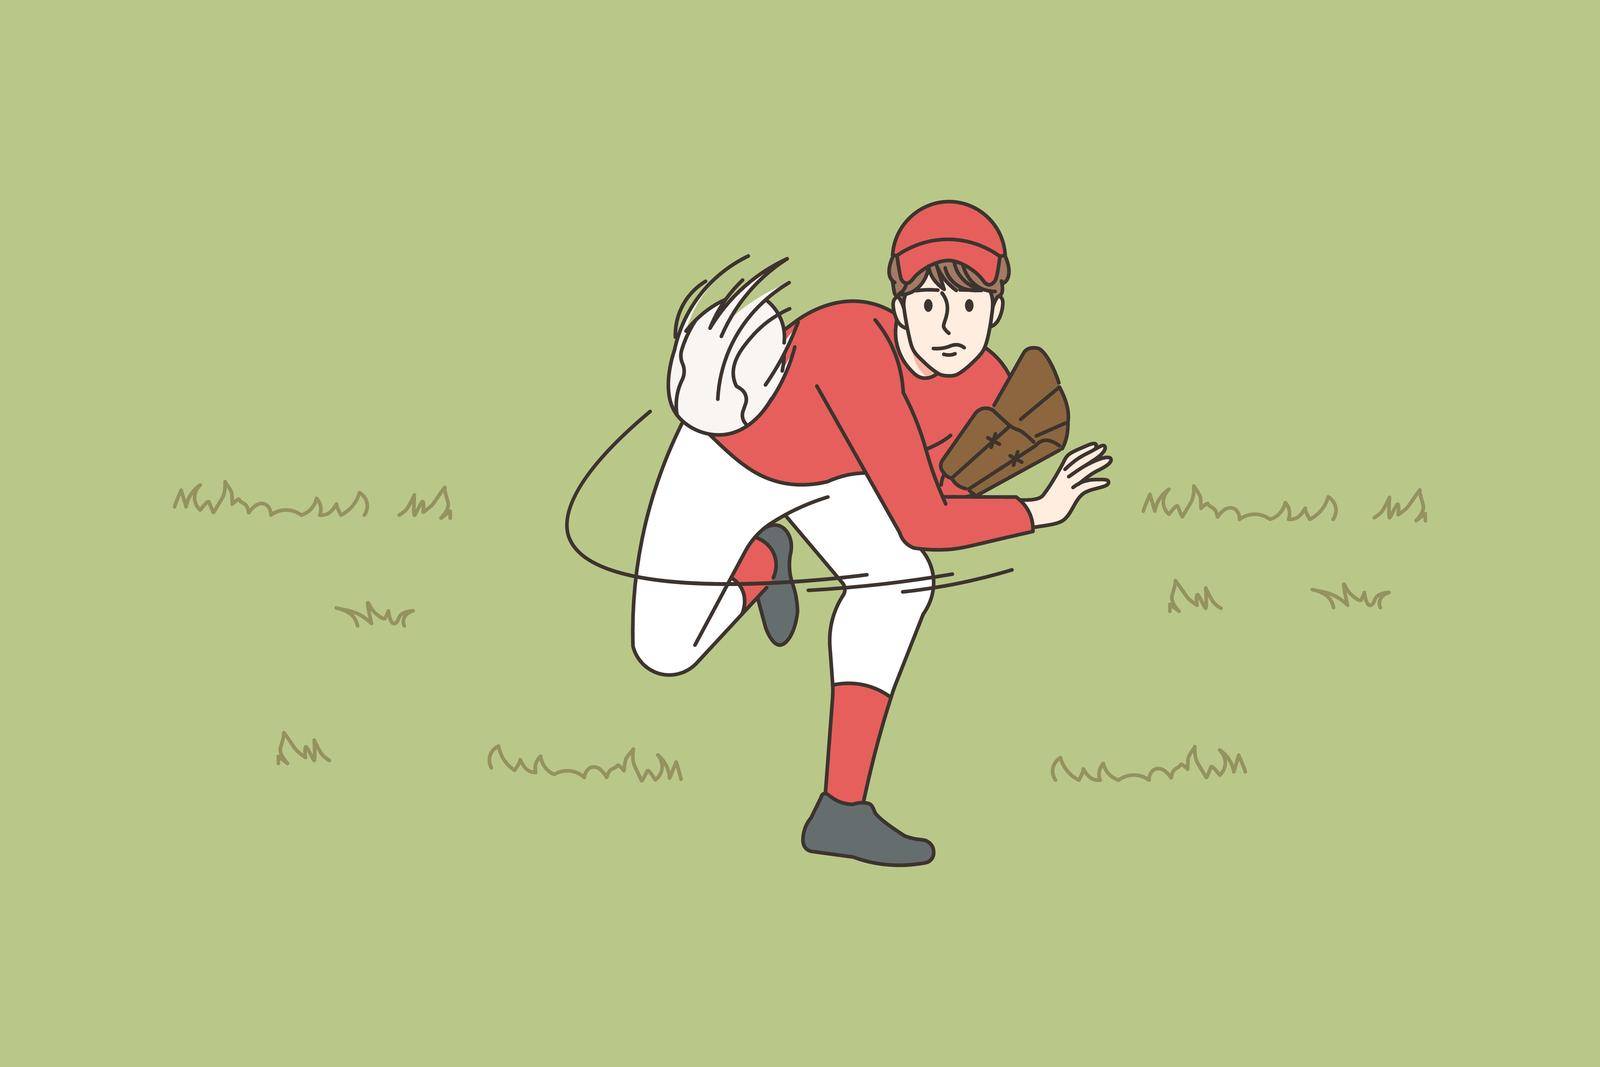 Sportsman playing baseball on field. Man in uniform throwing ball engaged in sport game. Hobby and leisure. Vector illustration.